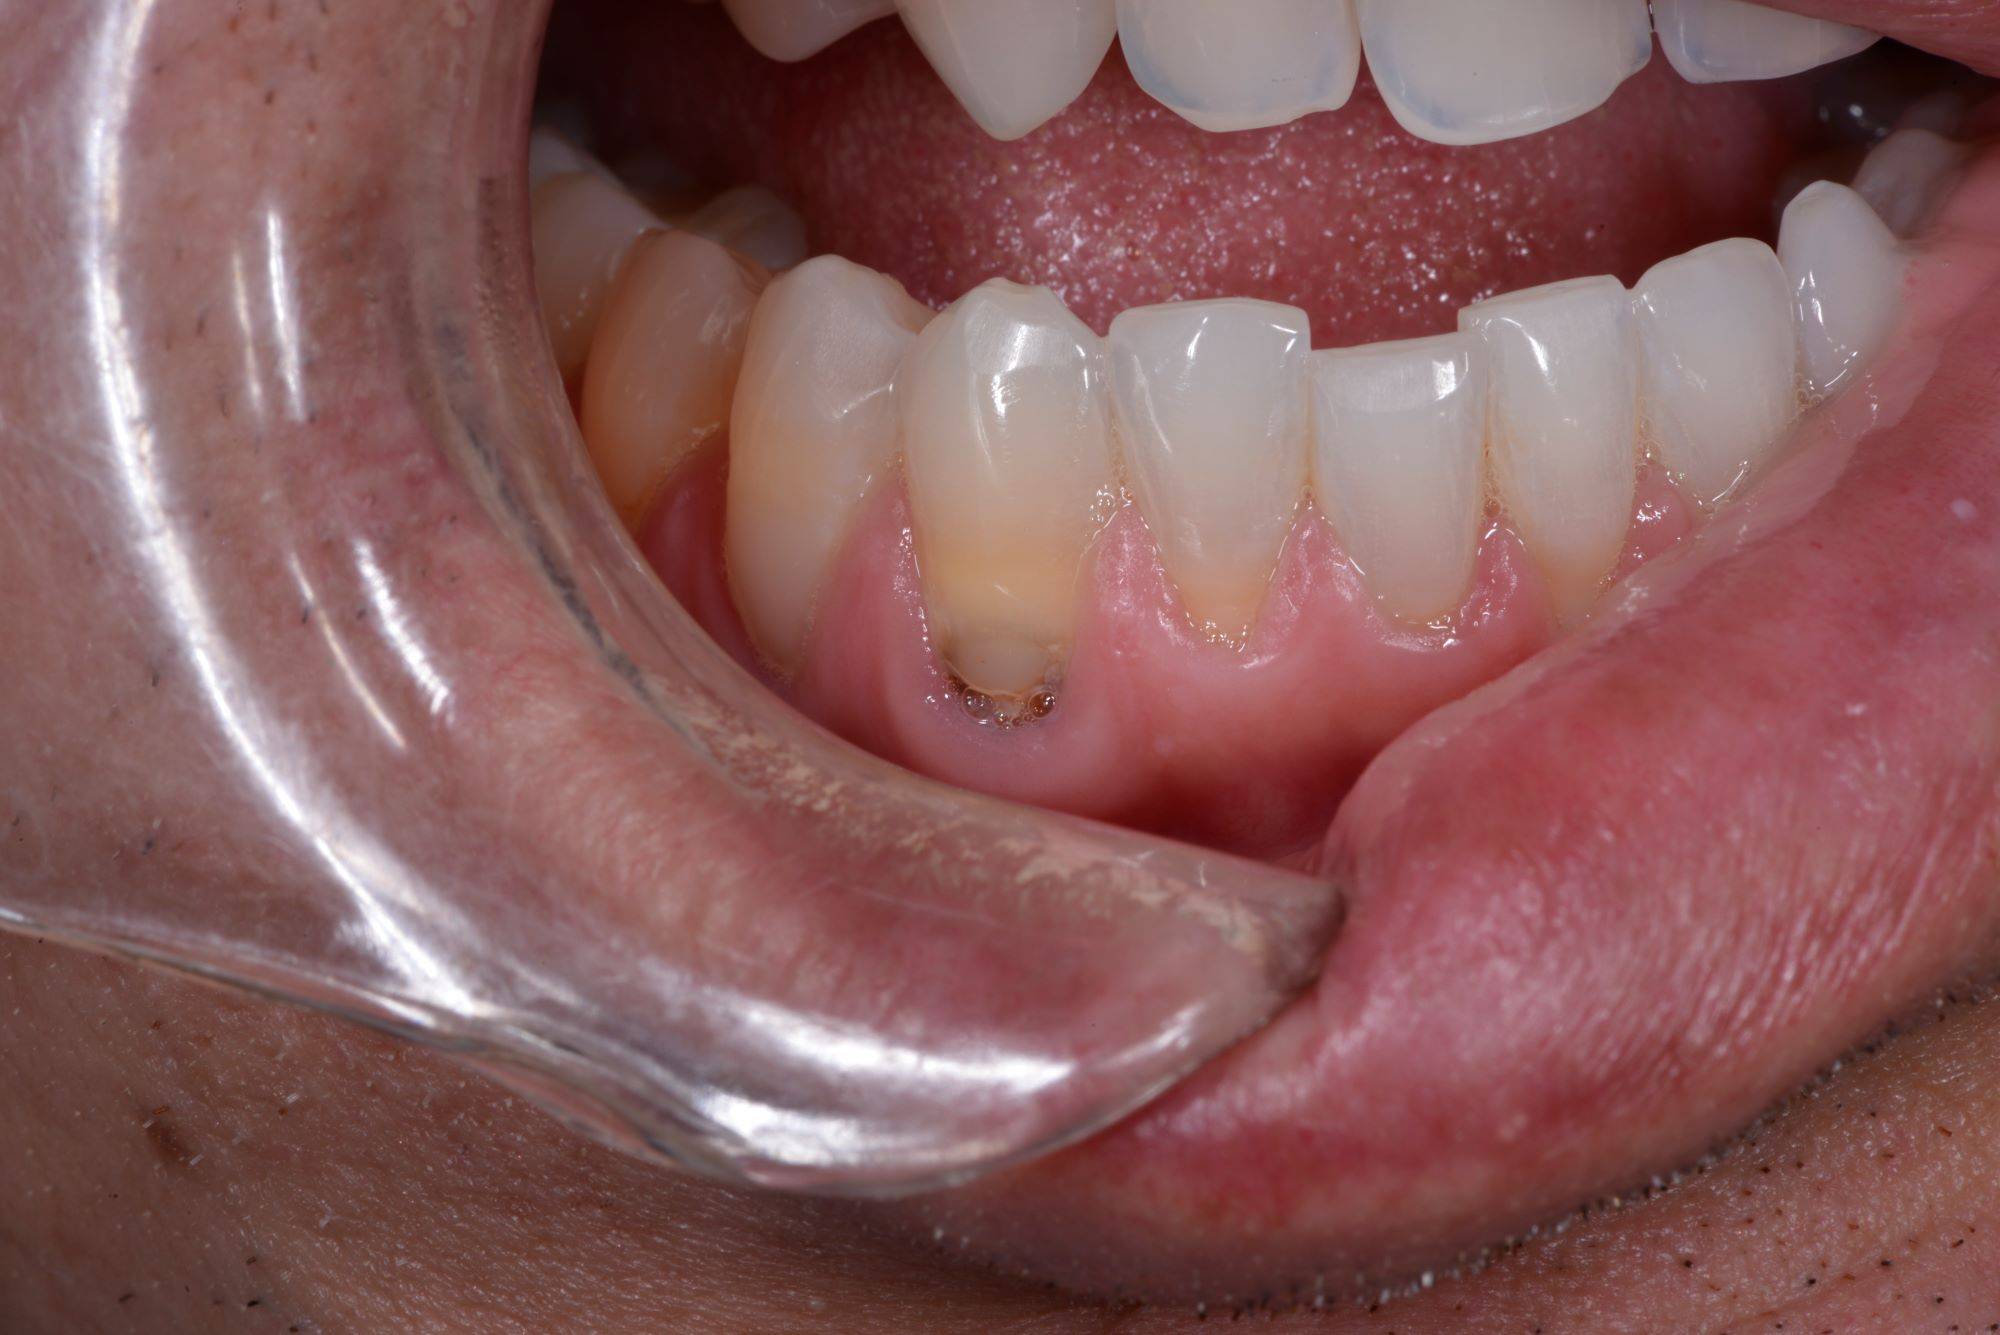 Lipe being pushed by plastic material to show subgingival decay